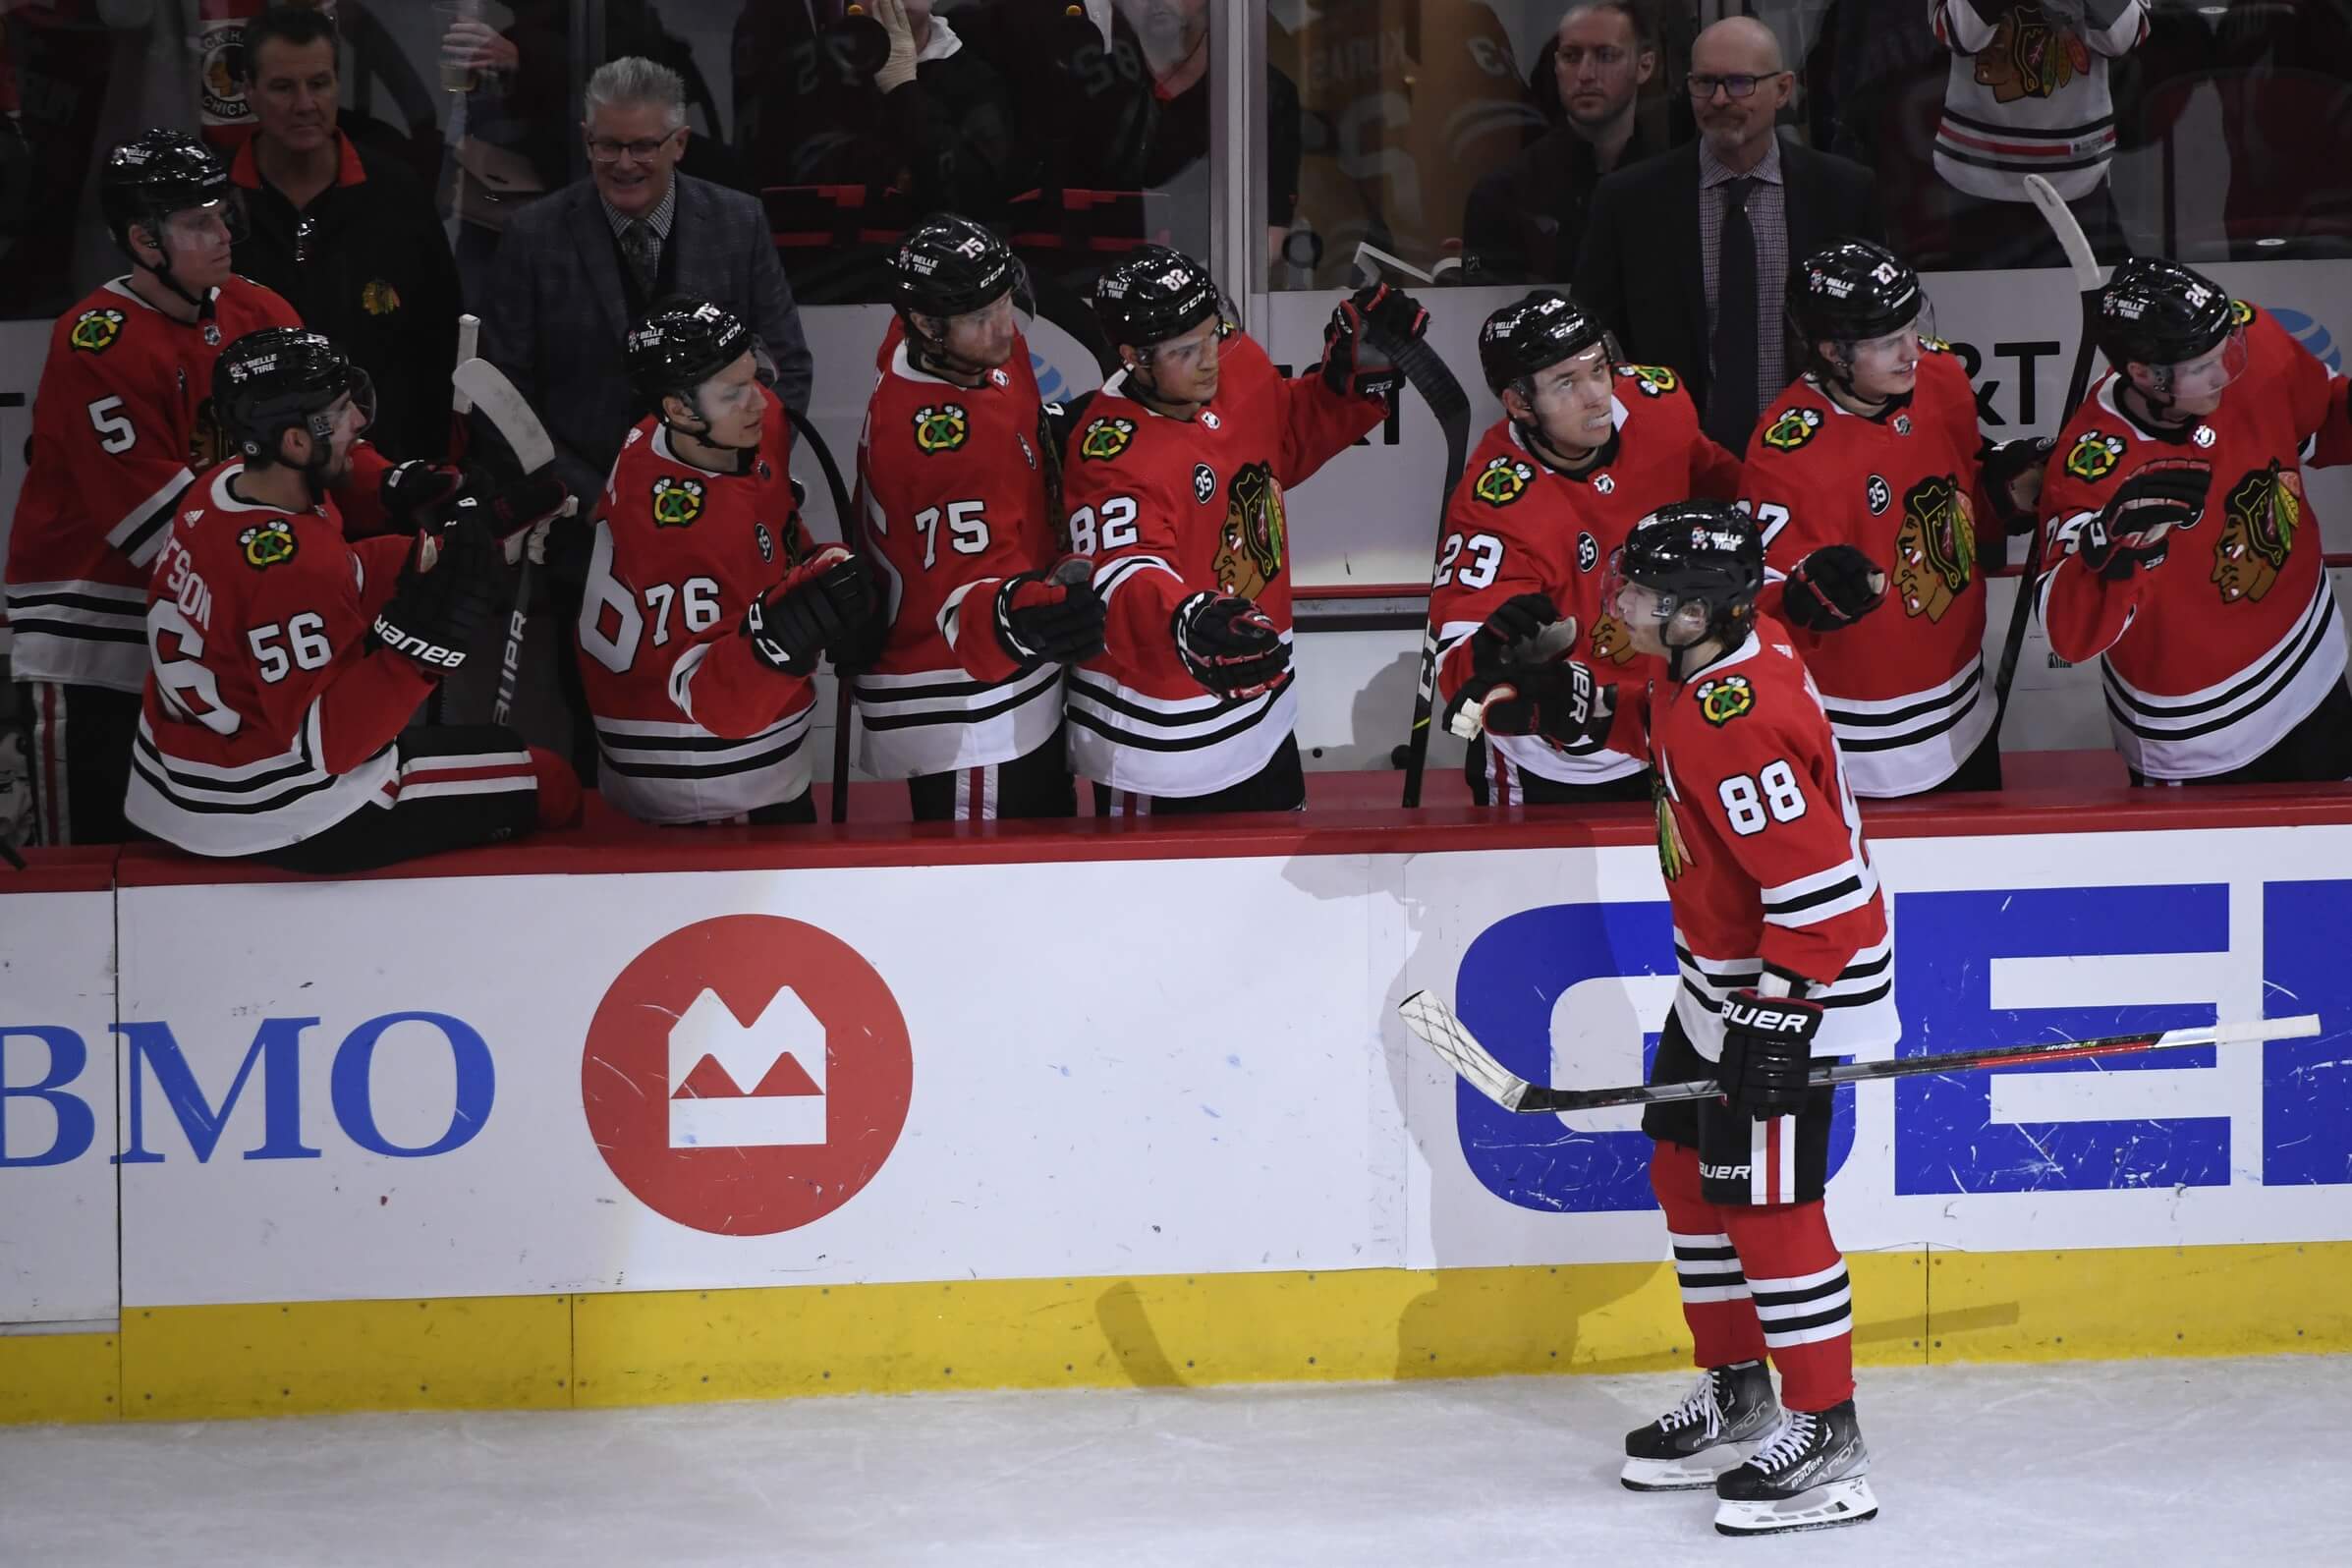 Feb 25, 2022; Chicago, Illinois, USA; Chicago Blackhawks right wing Patrick Kane (88) celebrates with teammates after scoring a goal against the New Jersey Devils during the second period at the United Center.